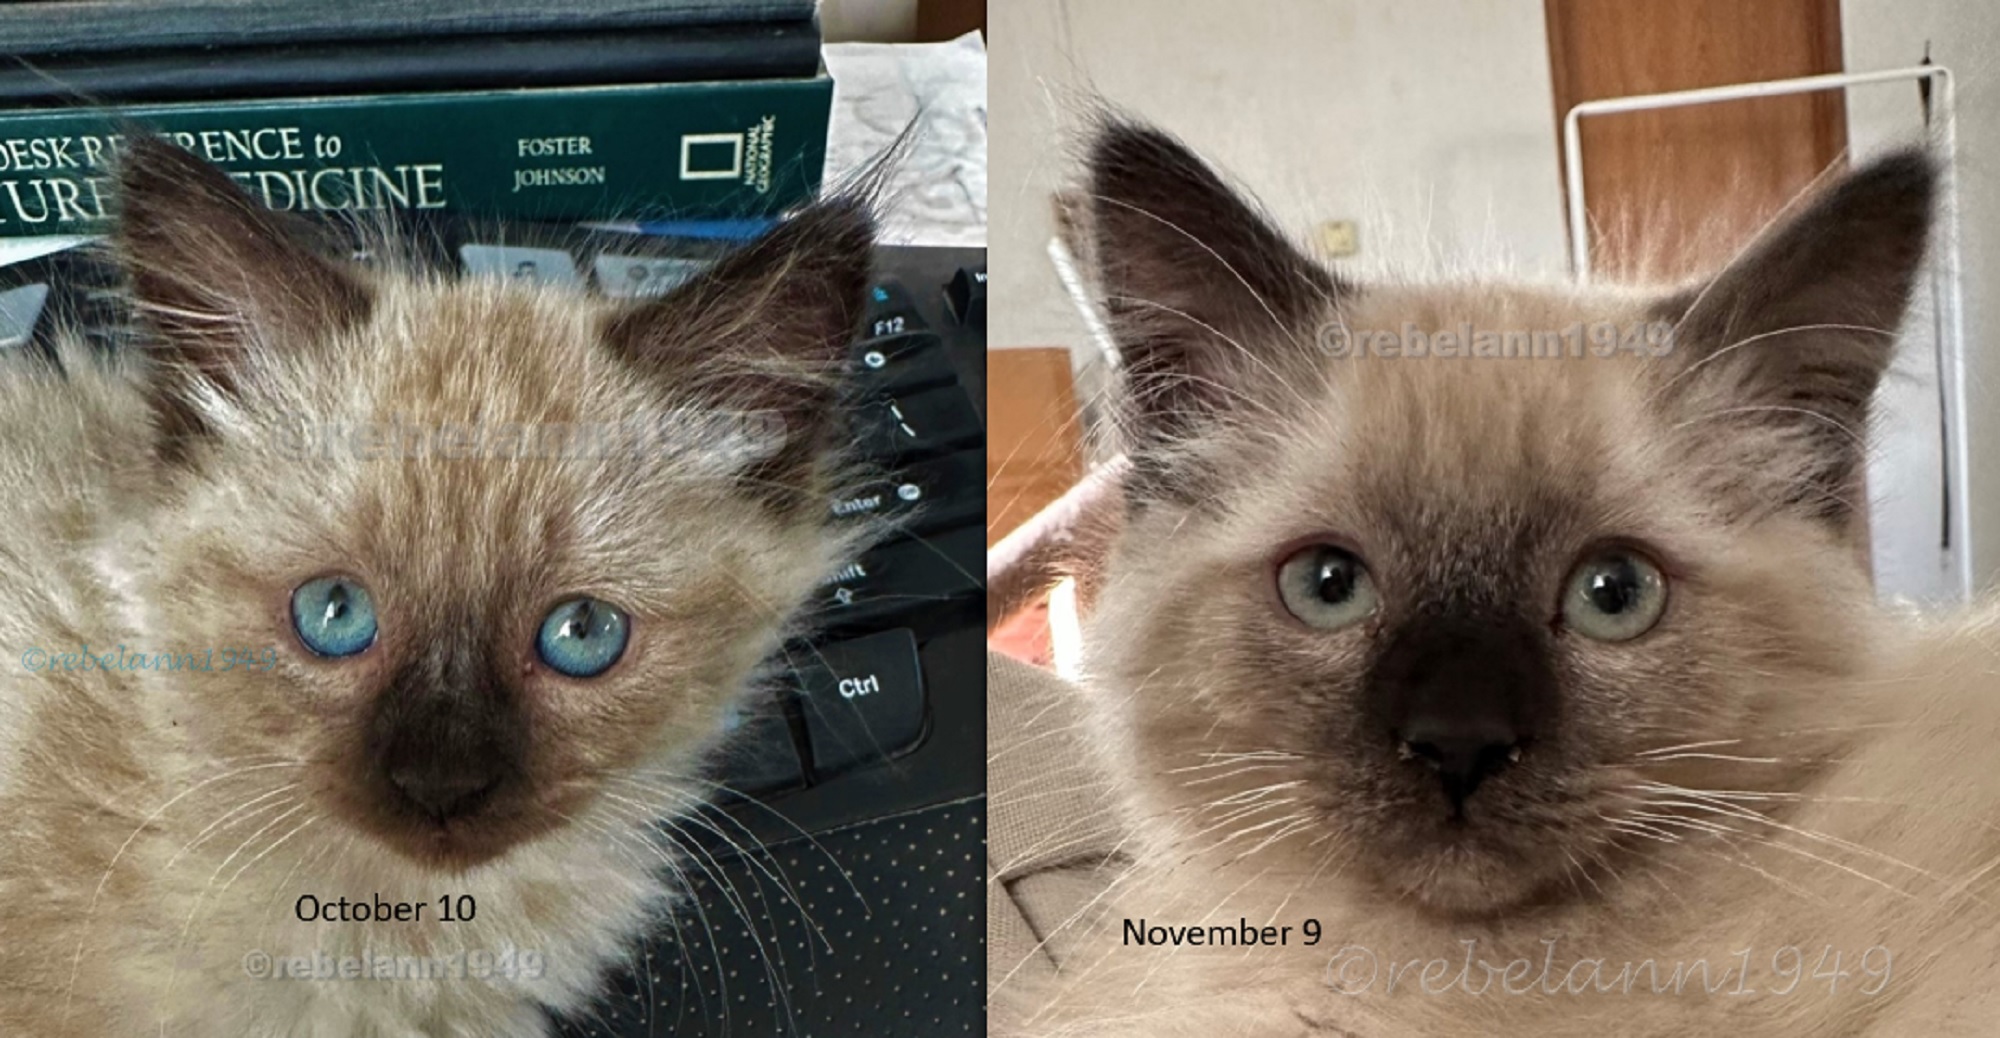 Eye color changed in less than 30 days. 